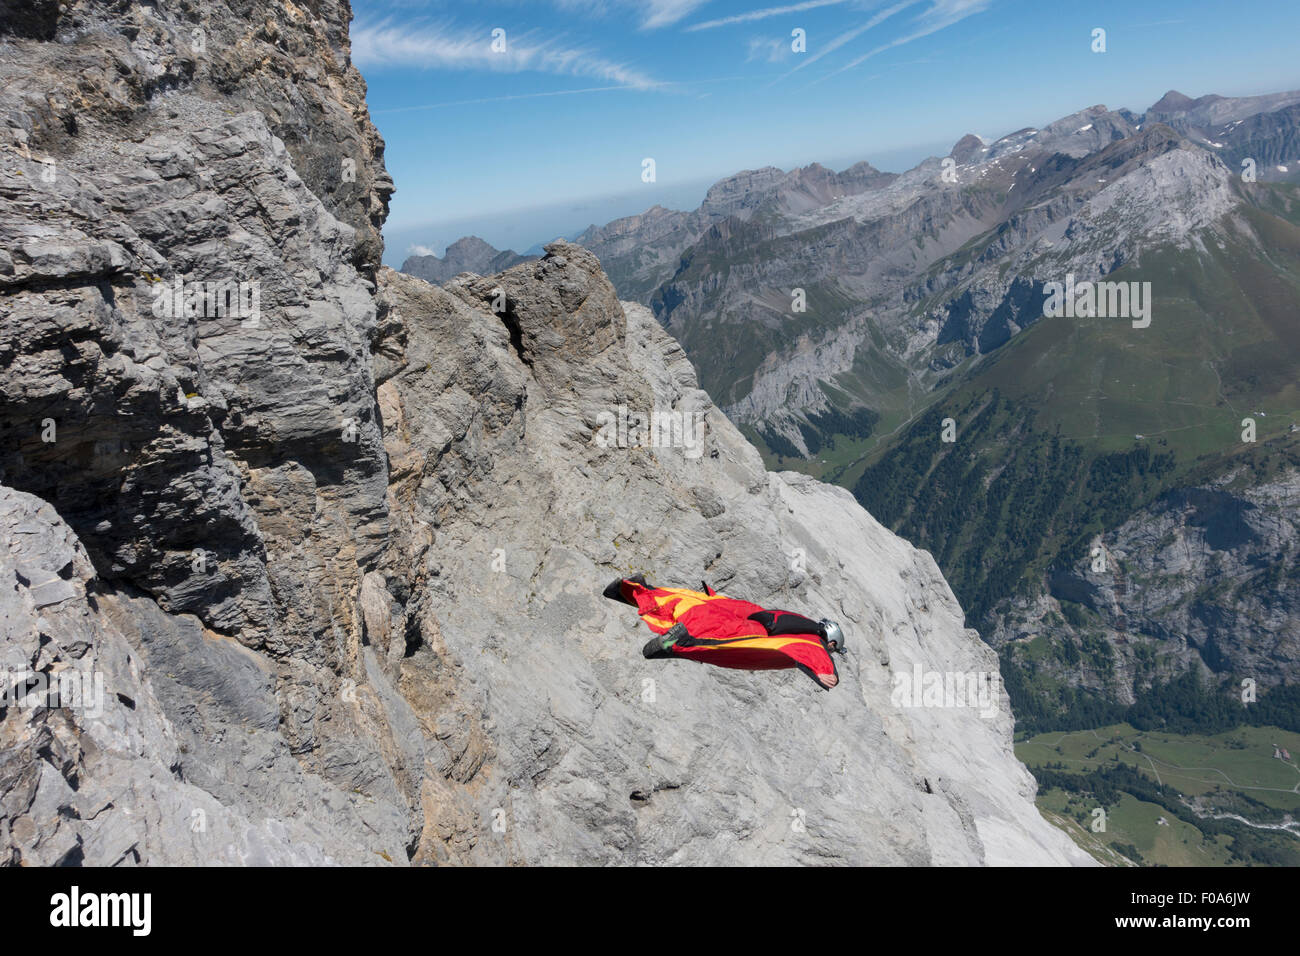 Wingsuit BASE jumper exited off a cliff downwards the valley and started flying with his birdman suit. Stock Photo